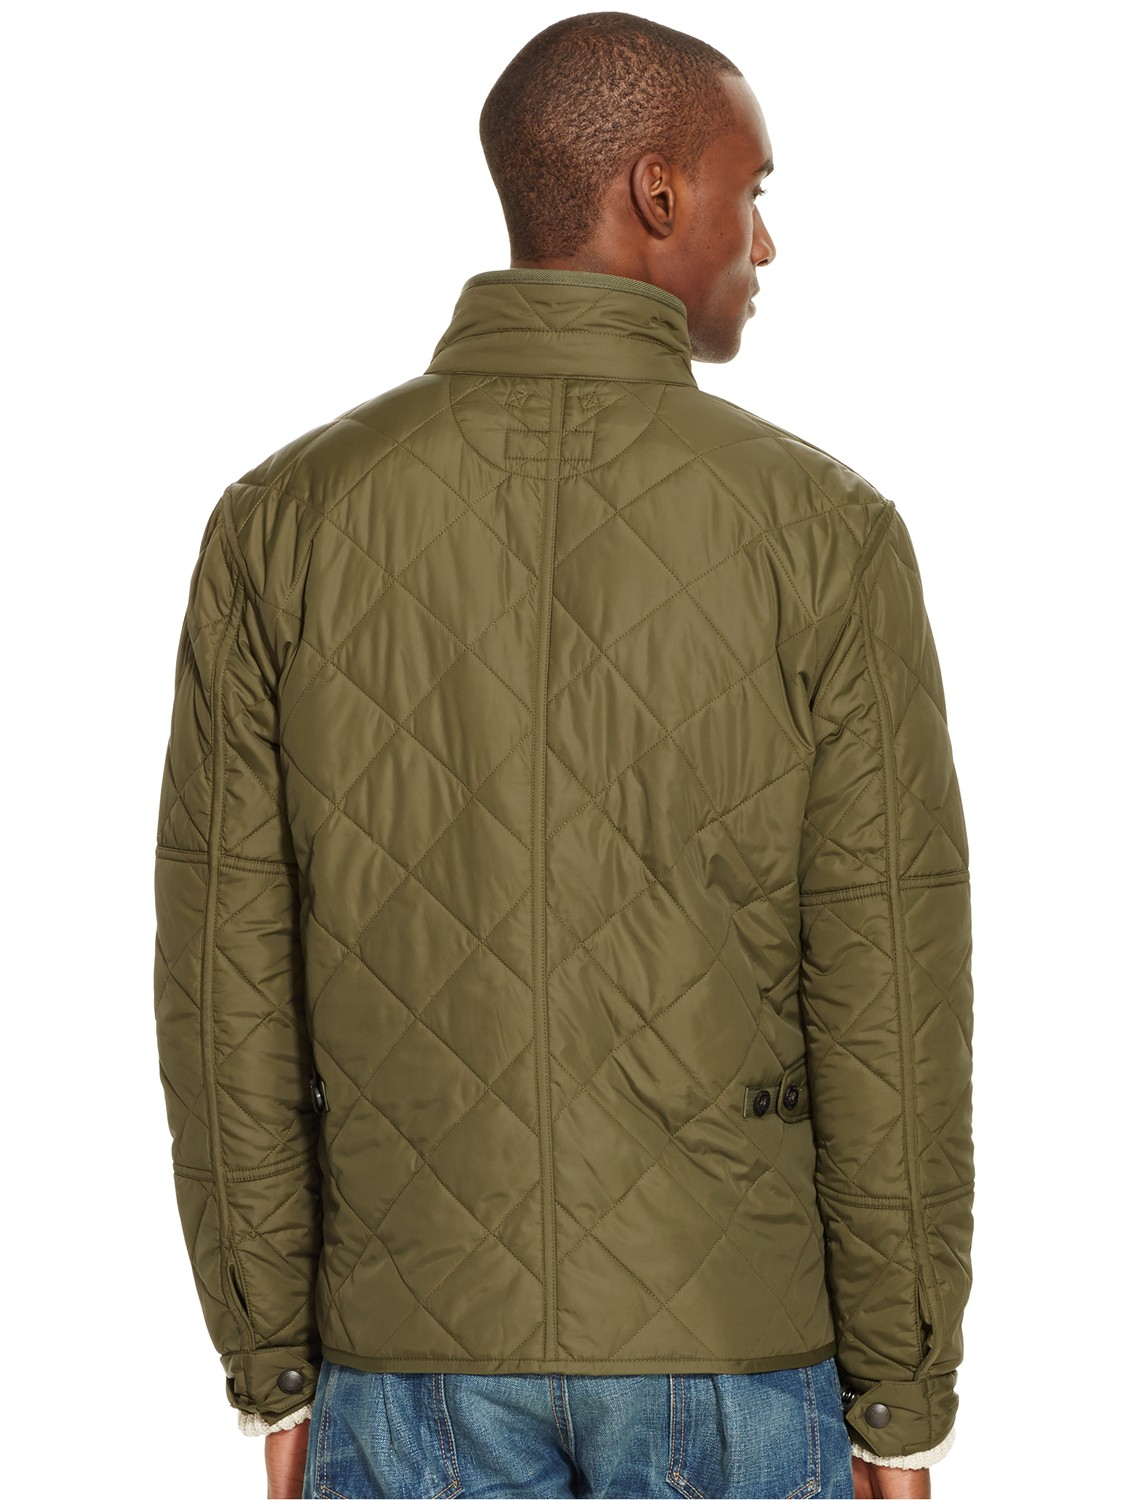 Polo Ralph Lauren Synthetic Dartmouth Lined Quilted Jacket for Men - Lyst